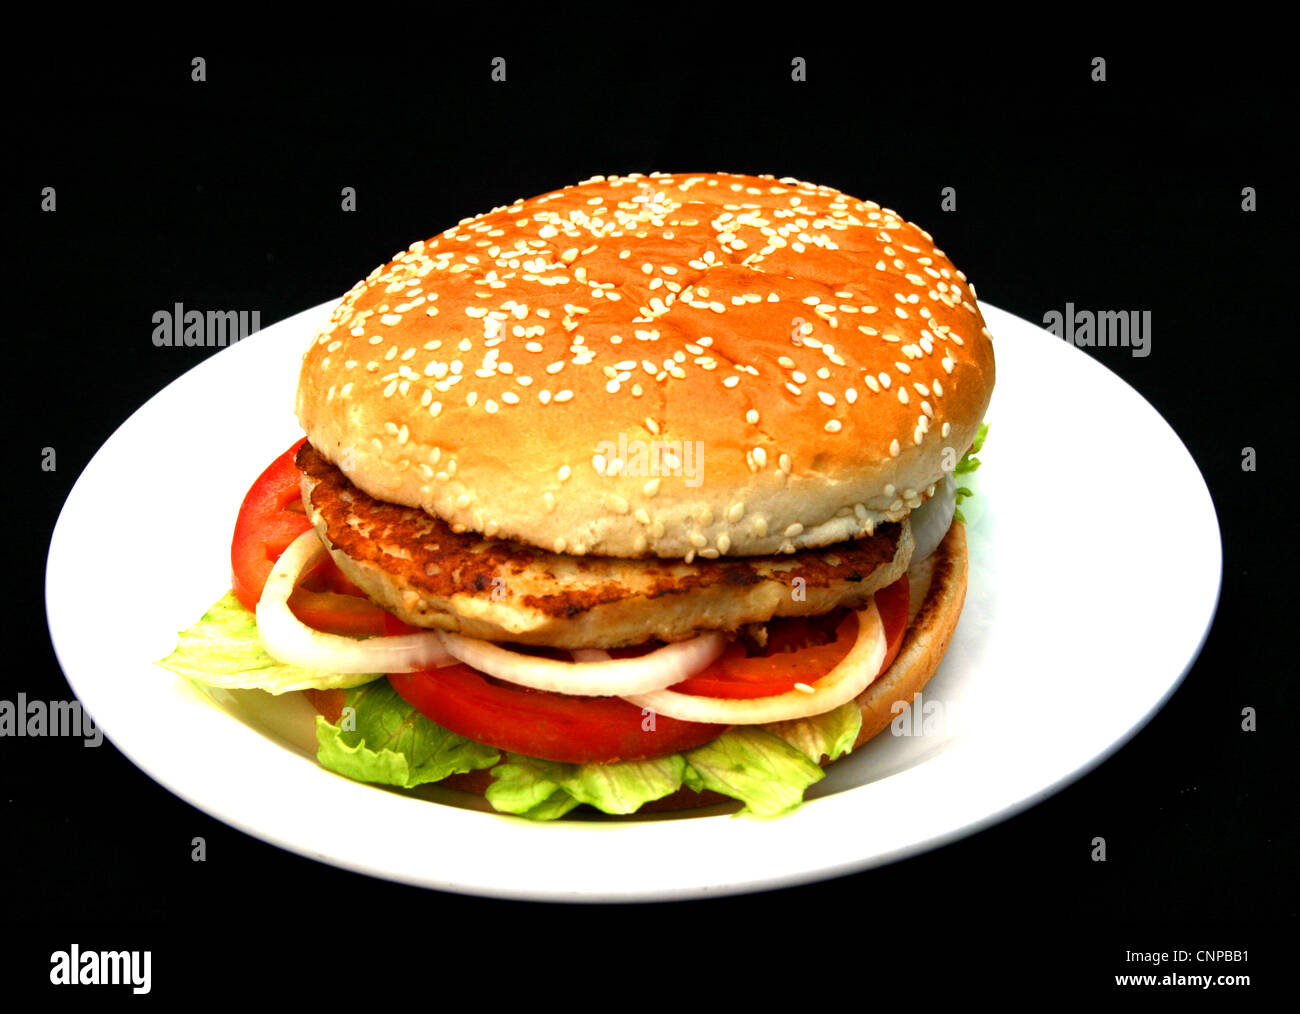 Grilled chicken burger with veggies on a white plate isolated on black background Stock Photo